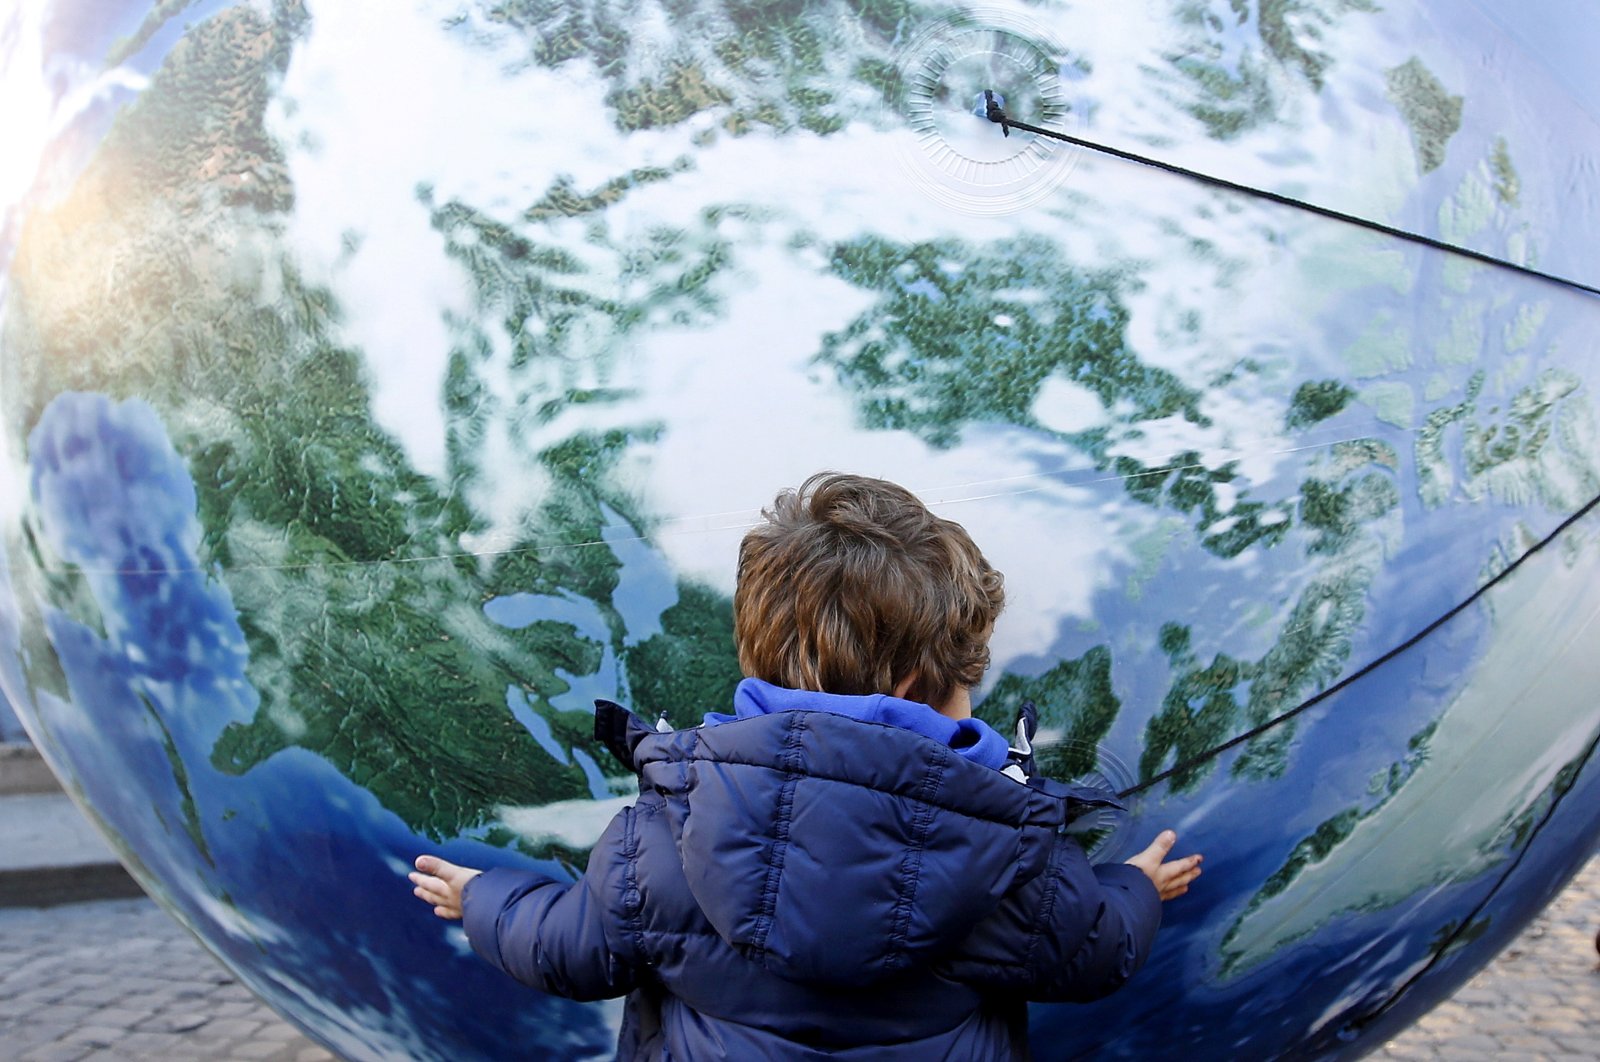 A child embraces a globe shaped balloon during a rally held ahead of the start of the 2015 Paris World Climate Change Conference, known as the COP21 summit, in Rome, Italy , Nov. 29, 2015. (Reuters Photo)